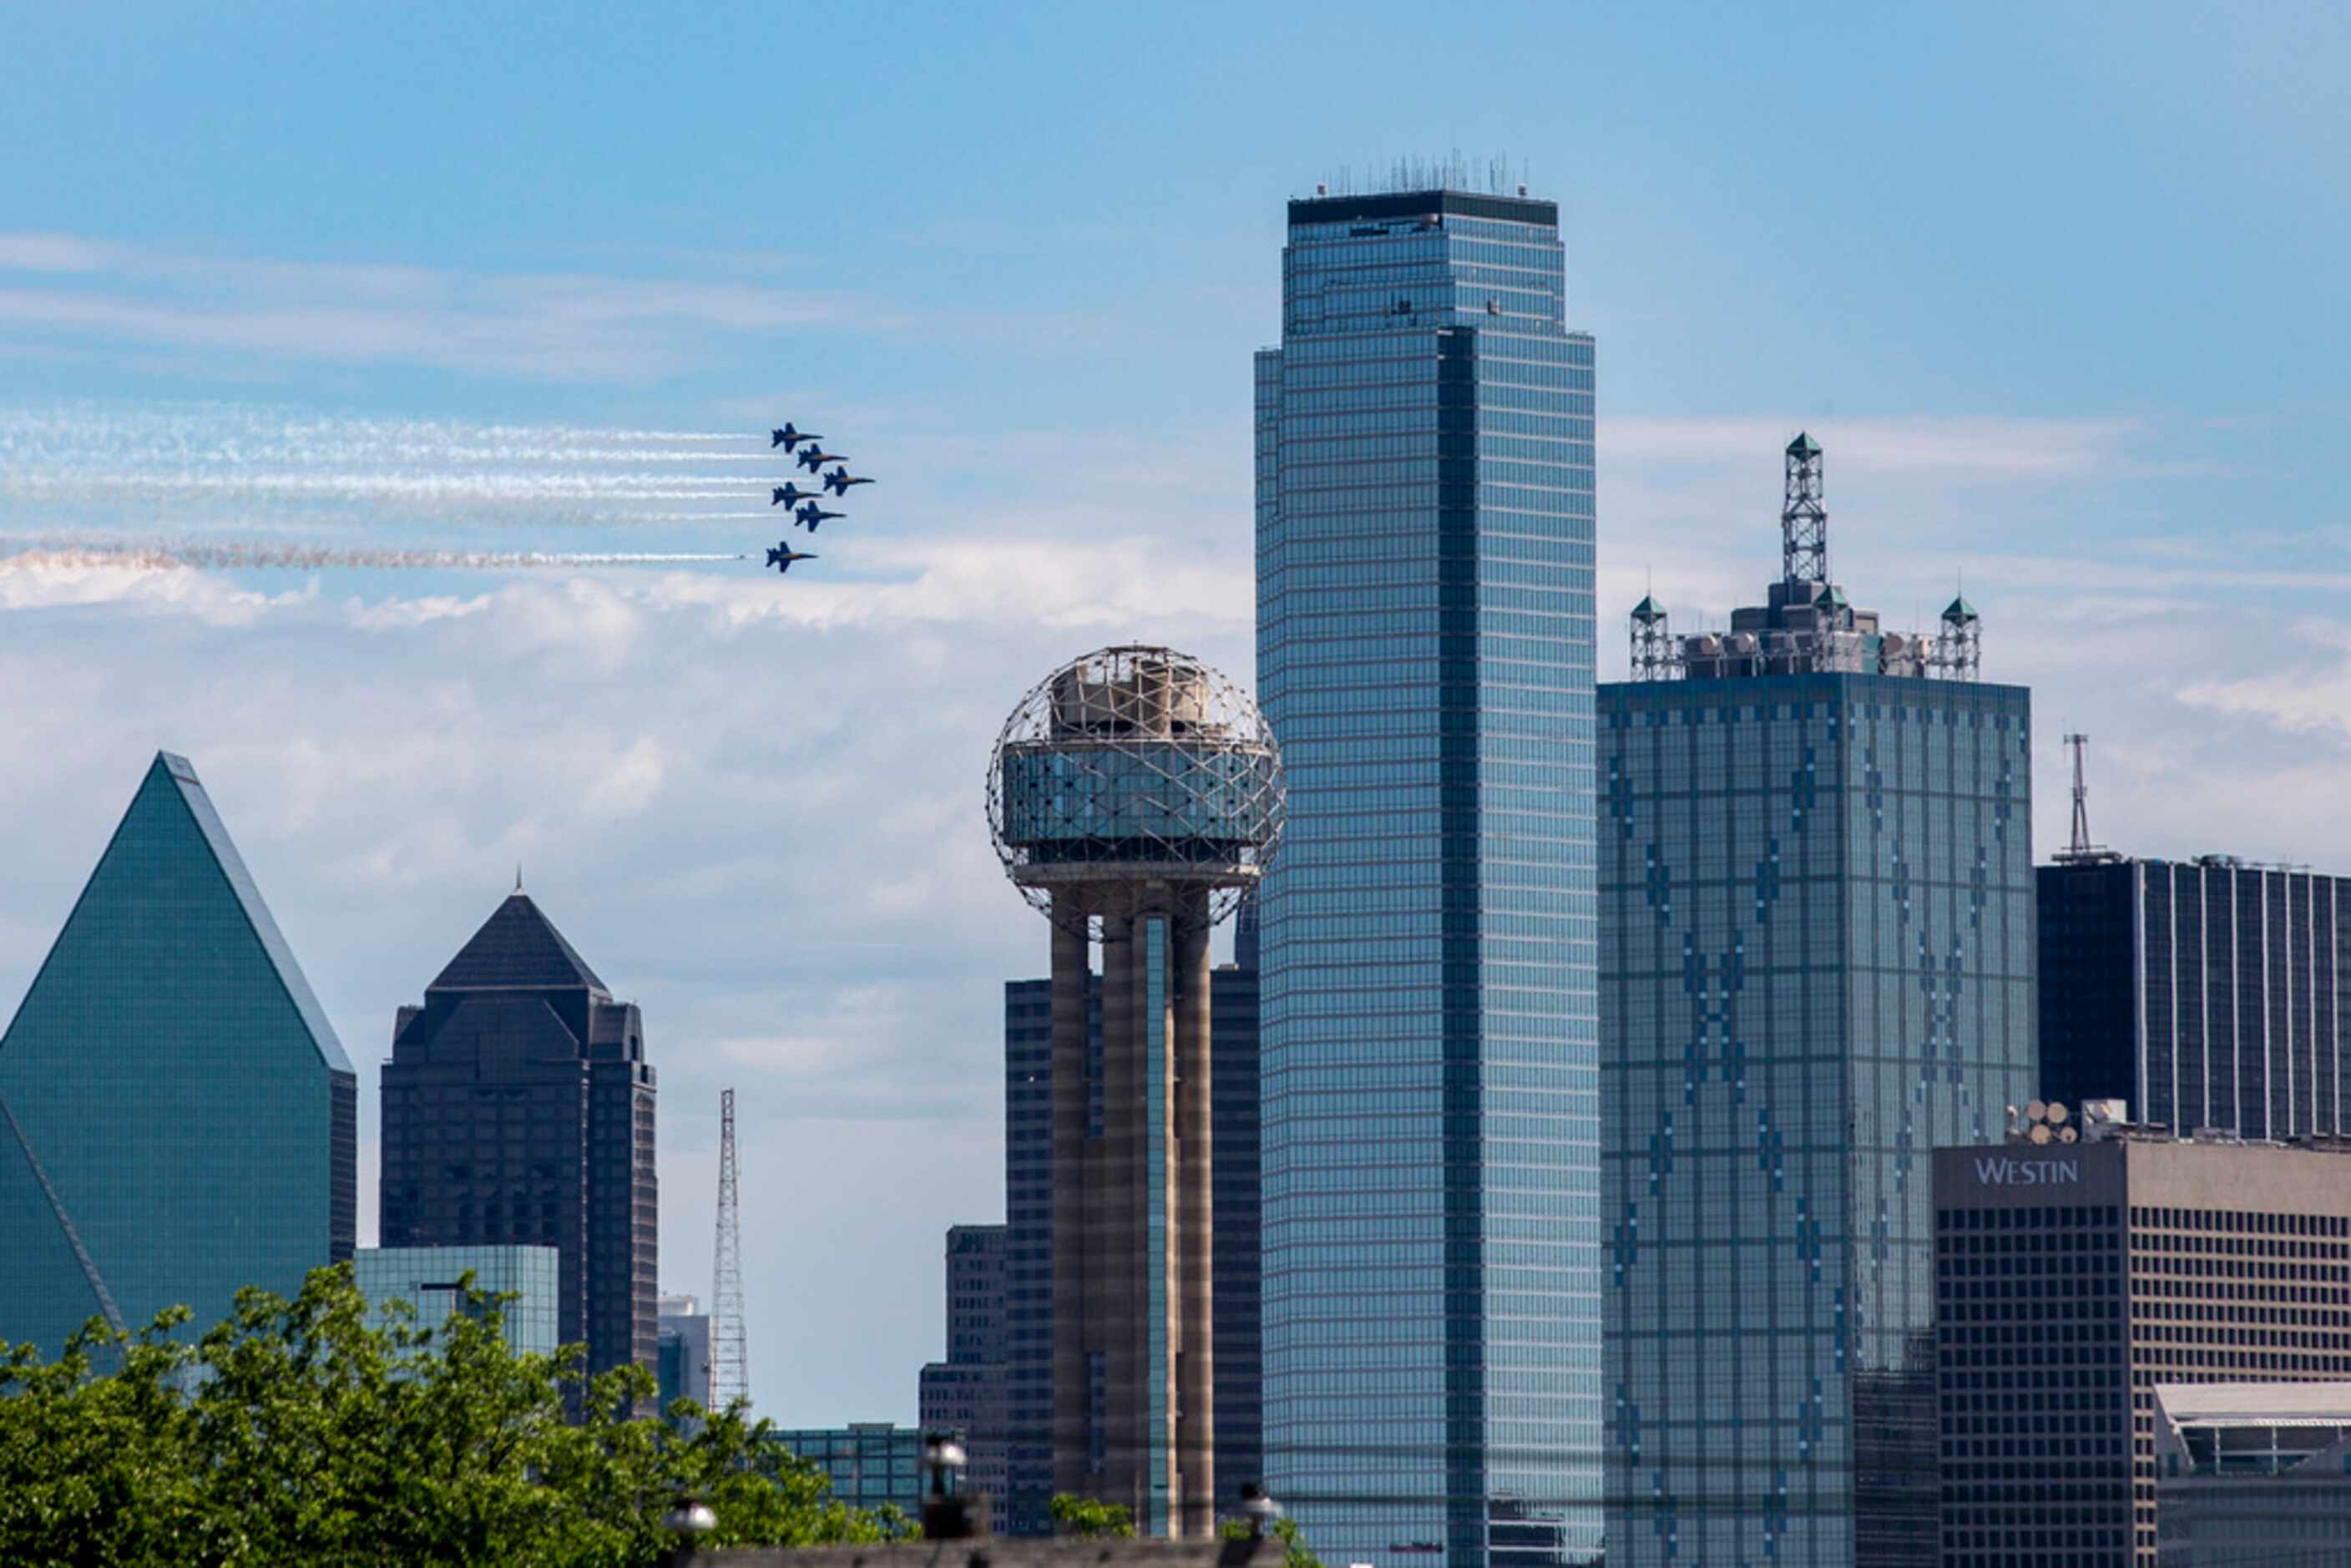 The U.S. Navy Blue Angels perform a flyover in Dallas on Wednesday, May 6, 2020.